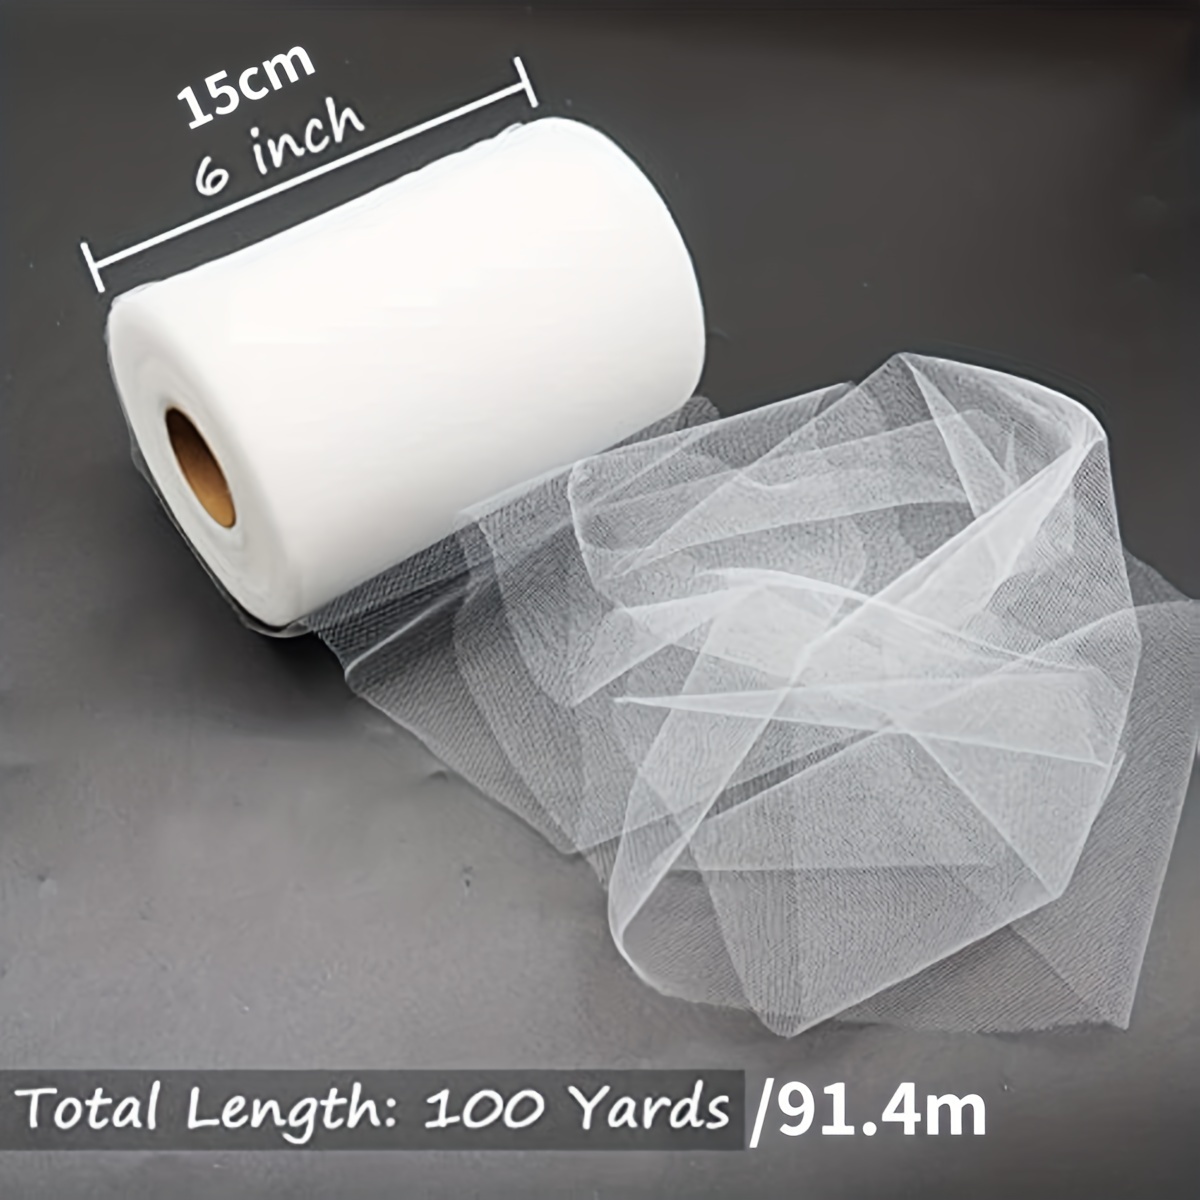  IONTACH White Tulle Fabric Rolls 54 Inch by 40 Yards Fabric  Tulle Bolt for Wedding Decorations DIY White Tutu Baby Shower Table Skirt  Ceiling Decor Birthday Party Craft Supplies : Home